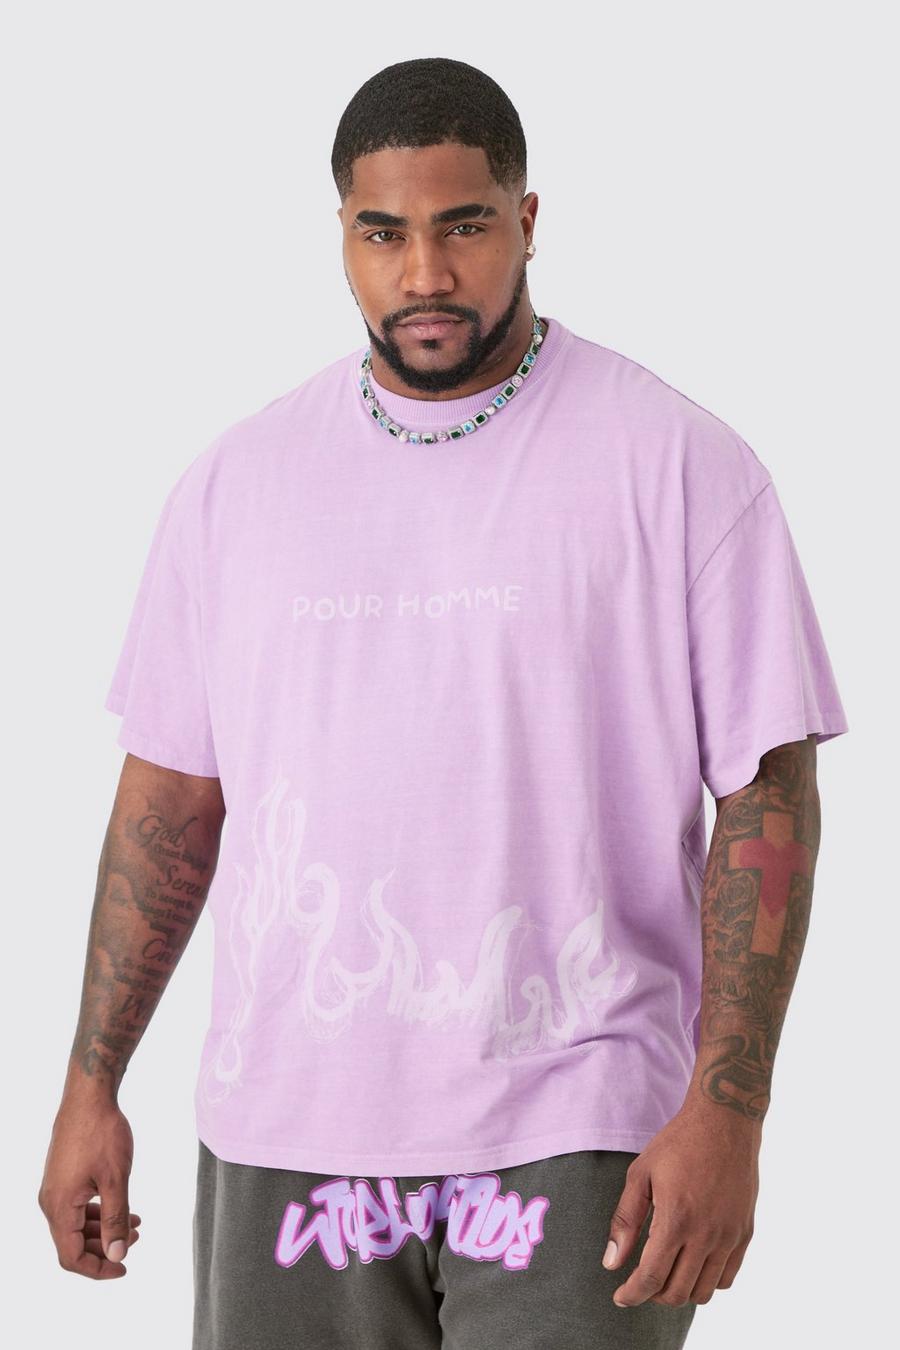 Plus Oversize T-Shirt mit Pour Homme Print in Pink